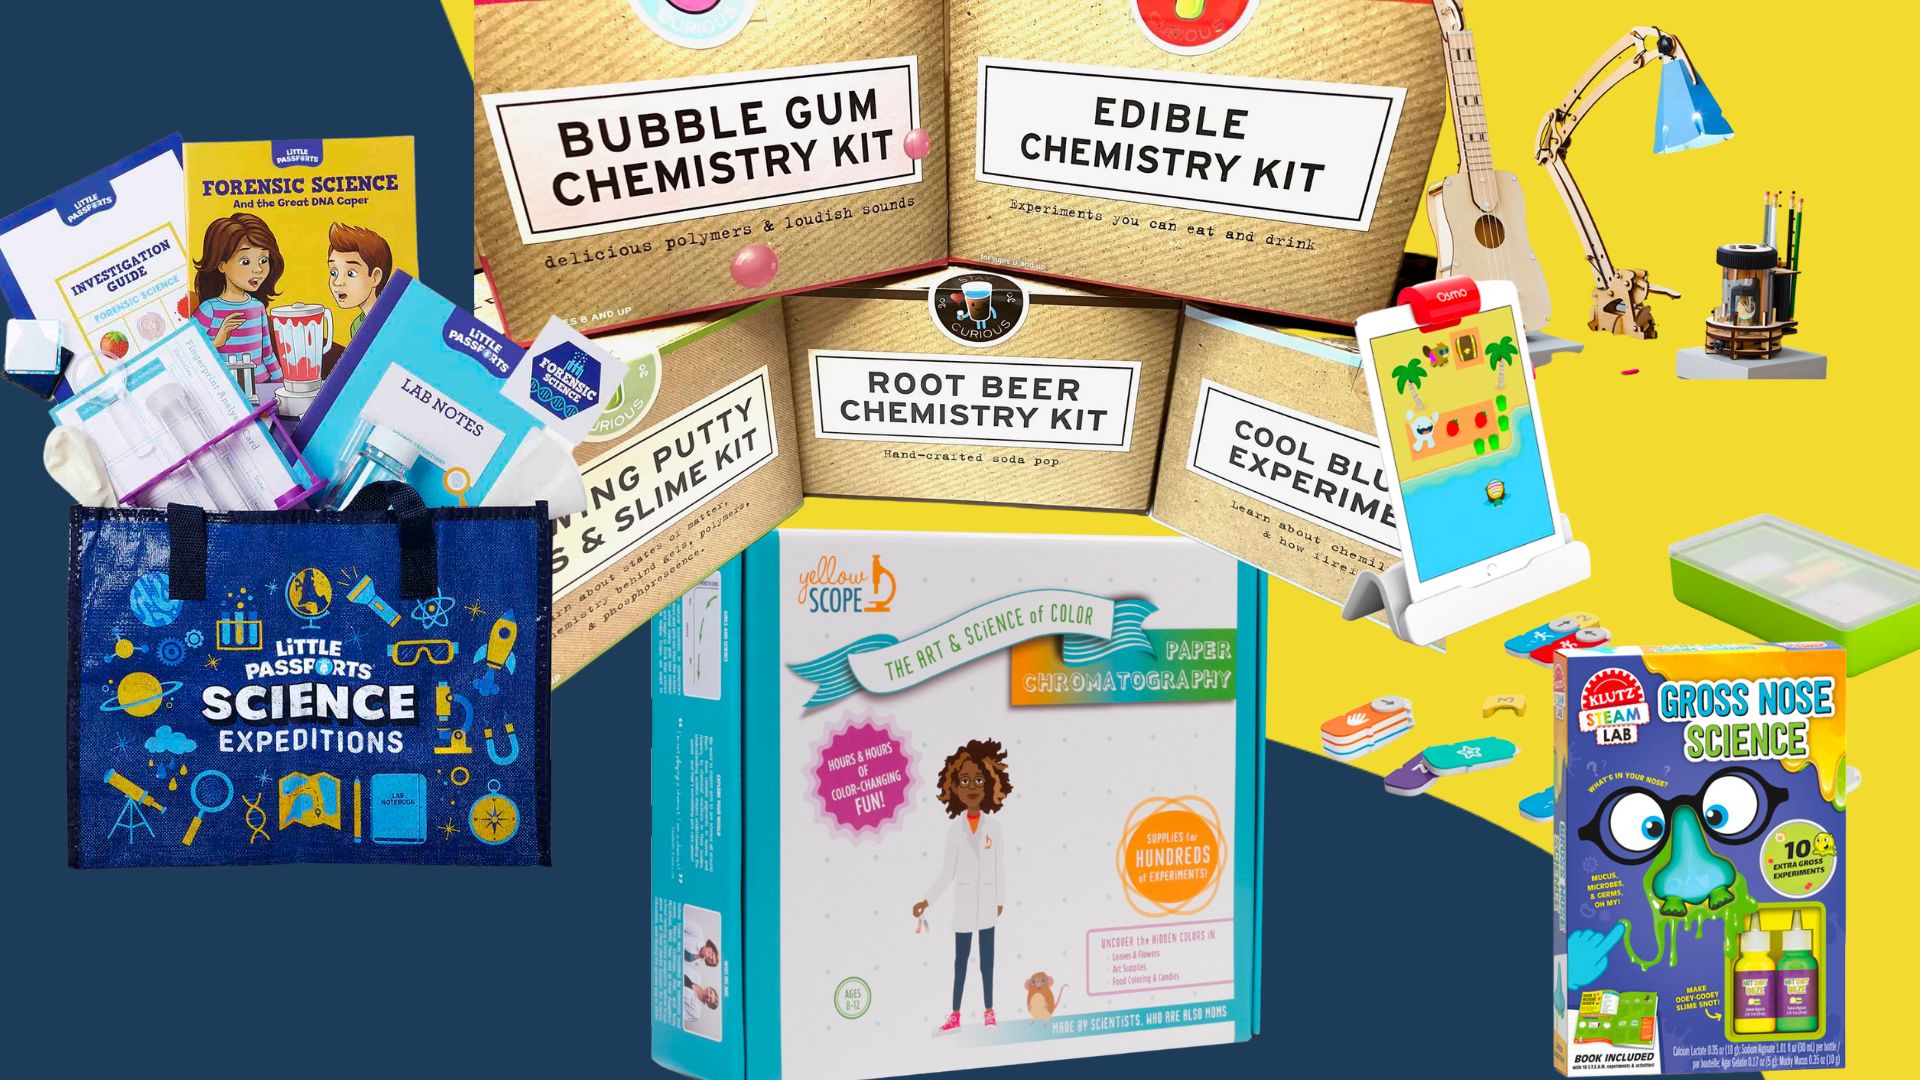 National Geographic STEM Kits on Sale Now: Dinosaurs, Microscopes & More